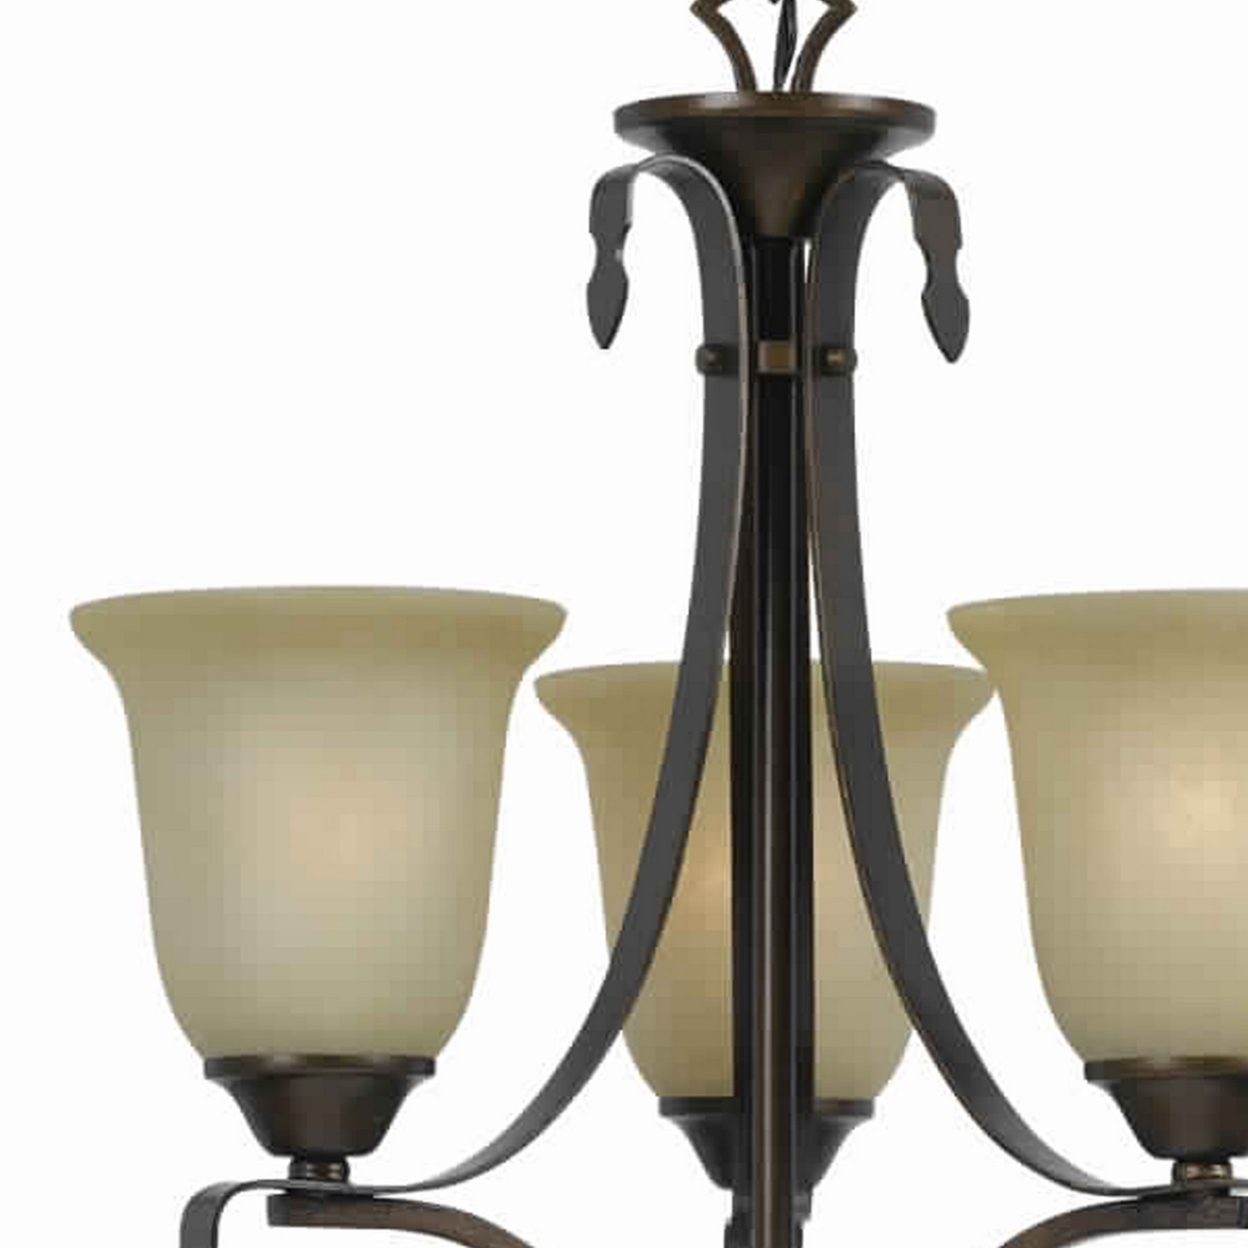 3 Bulb Uplight Chandelier With Metal Frame And Glass Shade,Bronze And Beige- Saltoro Sherpi